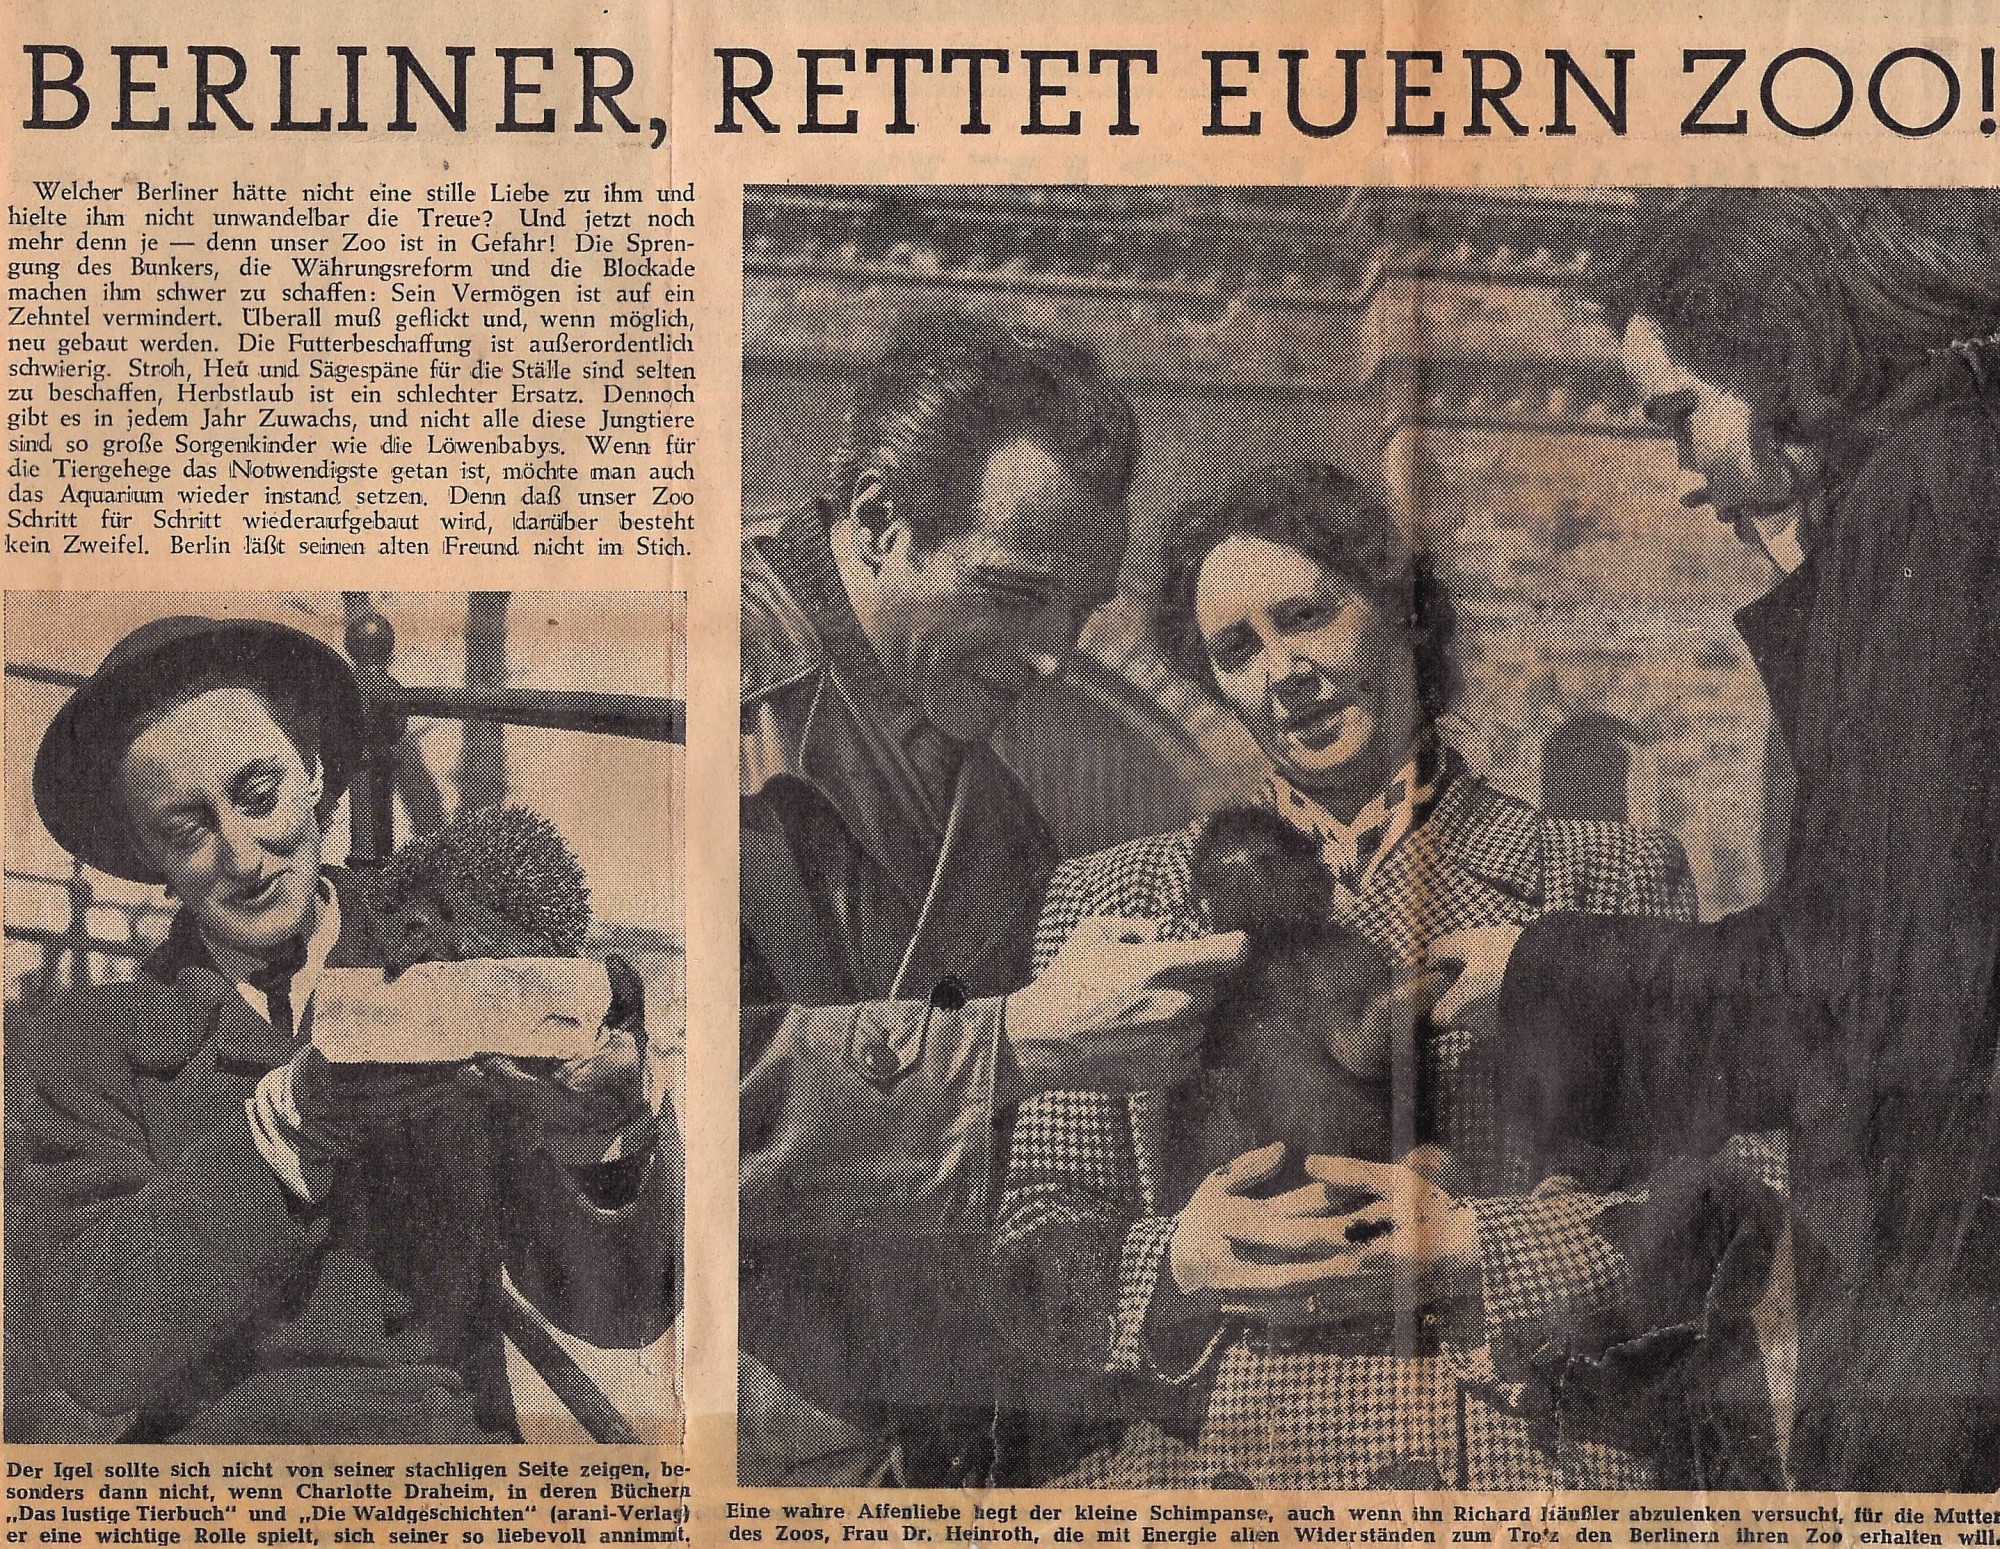 Newspaper clipping. Headline: Berliner, Rettet Euren Zoo! Four photographs showing people with dogs, birds, and a hedgehog.